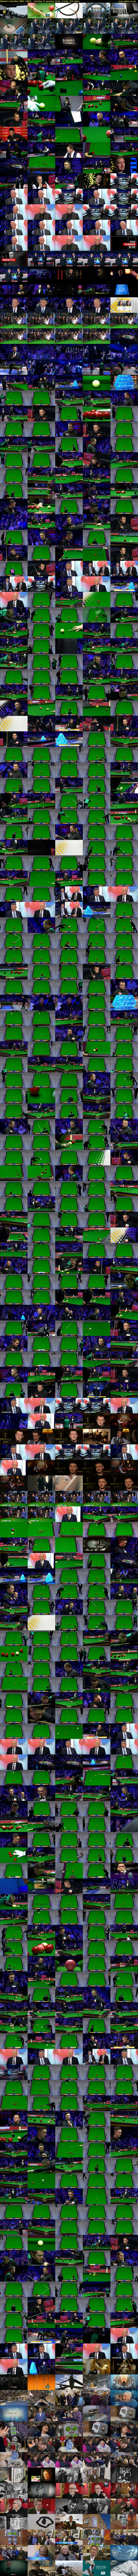 Masters Snooker (BBC TWO) Sunday 21 January 2018 13:00 - 17:15